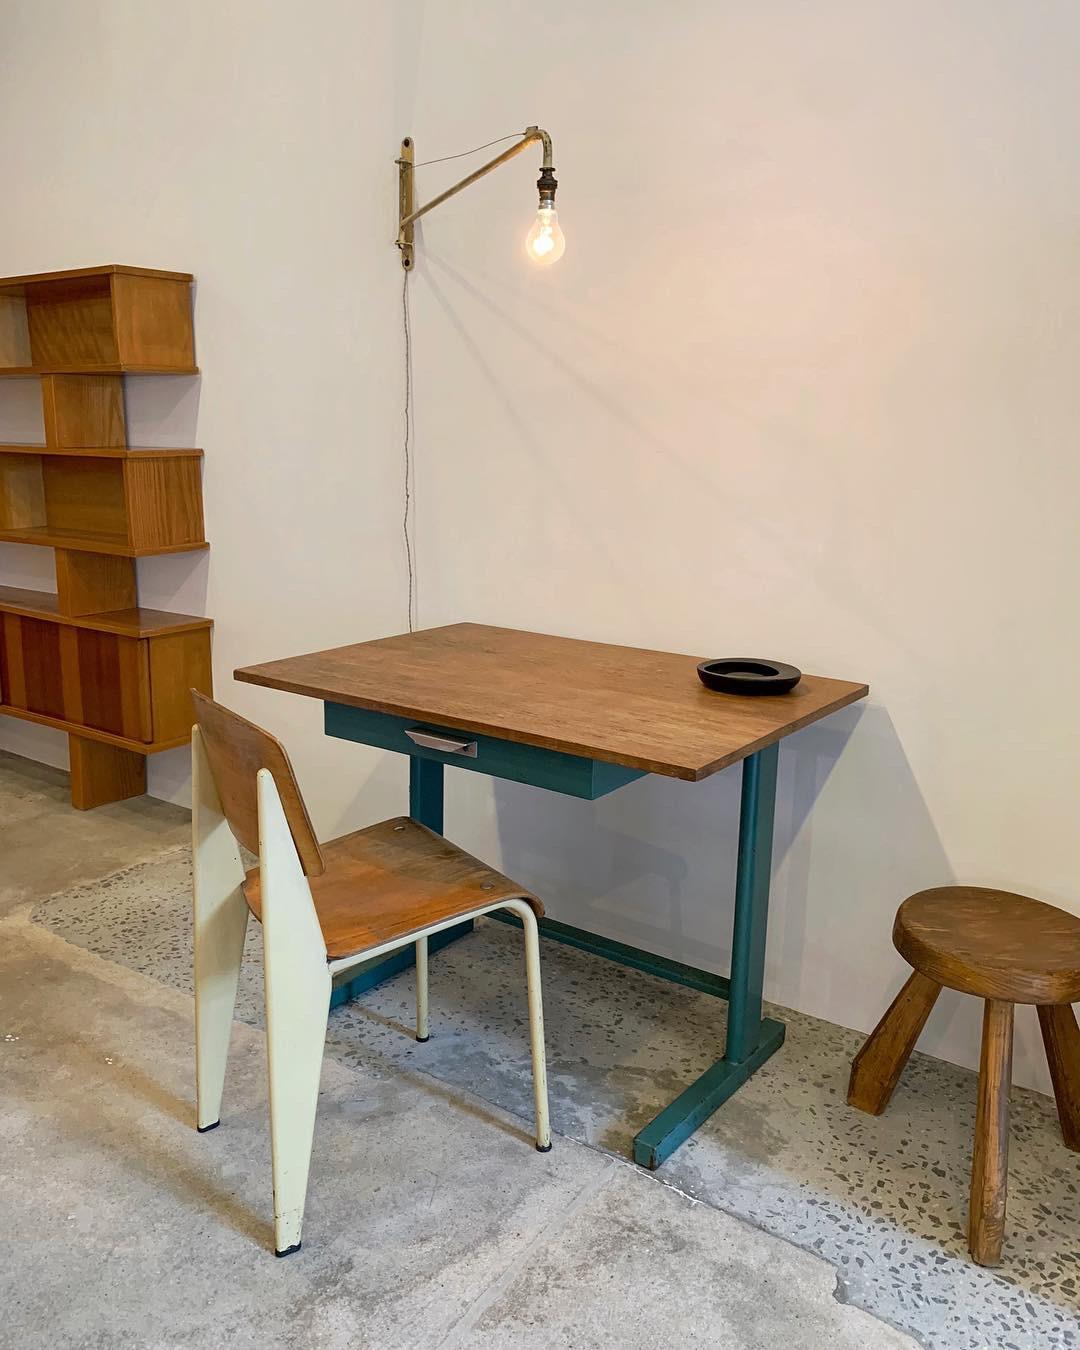 A great example of a Cité desk by Jean Prouvé, and manufactured by Ateliers Jean Prouvé, circa 1950.